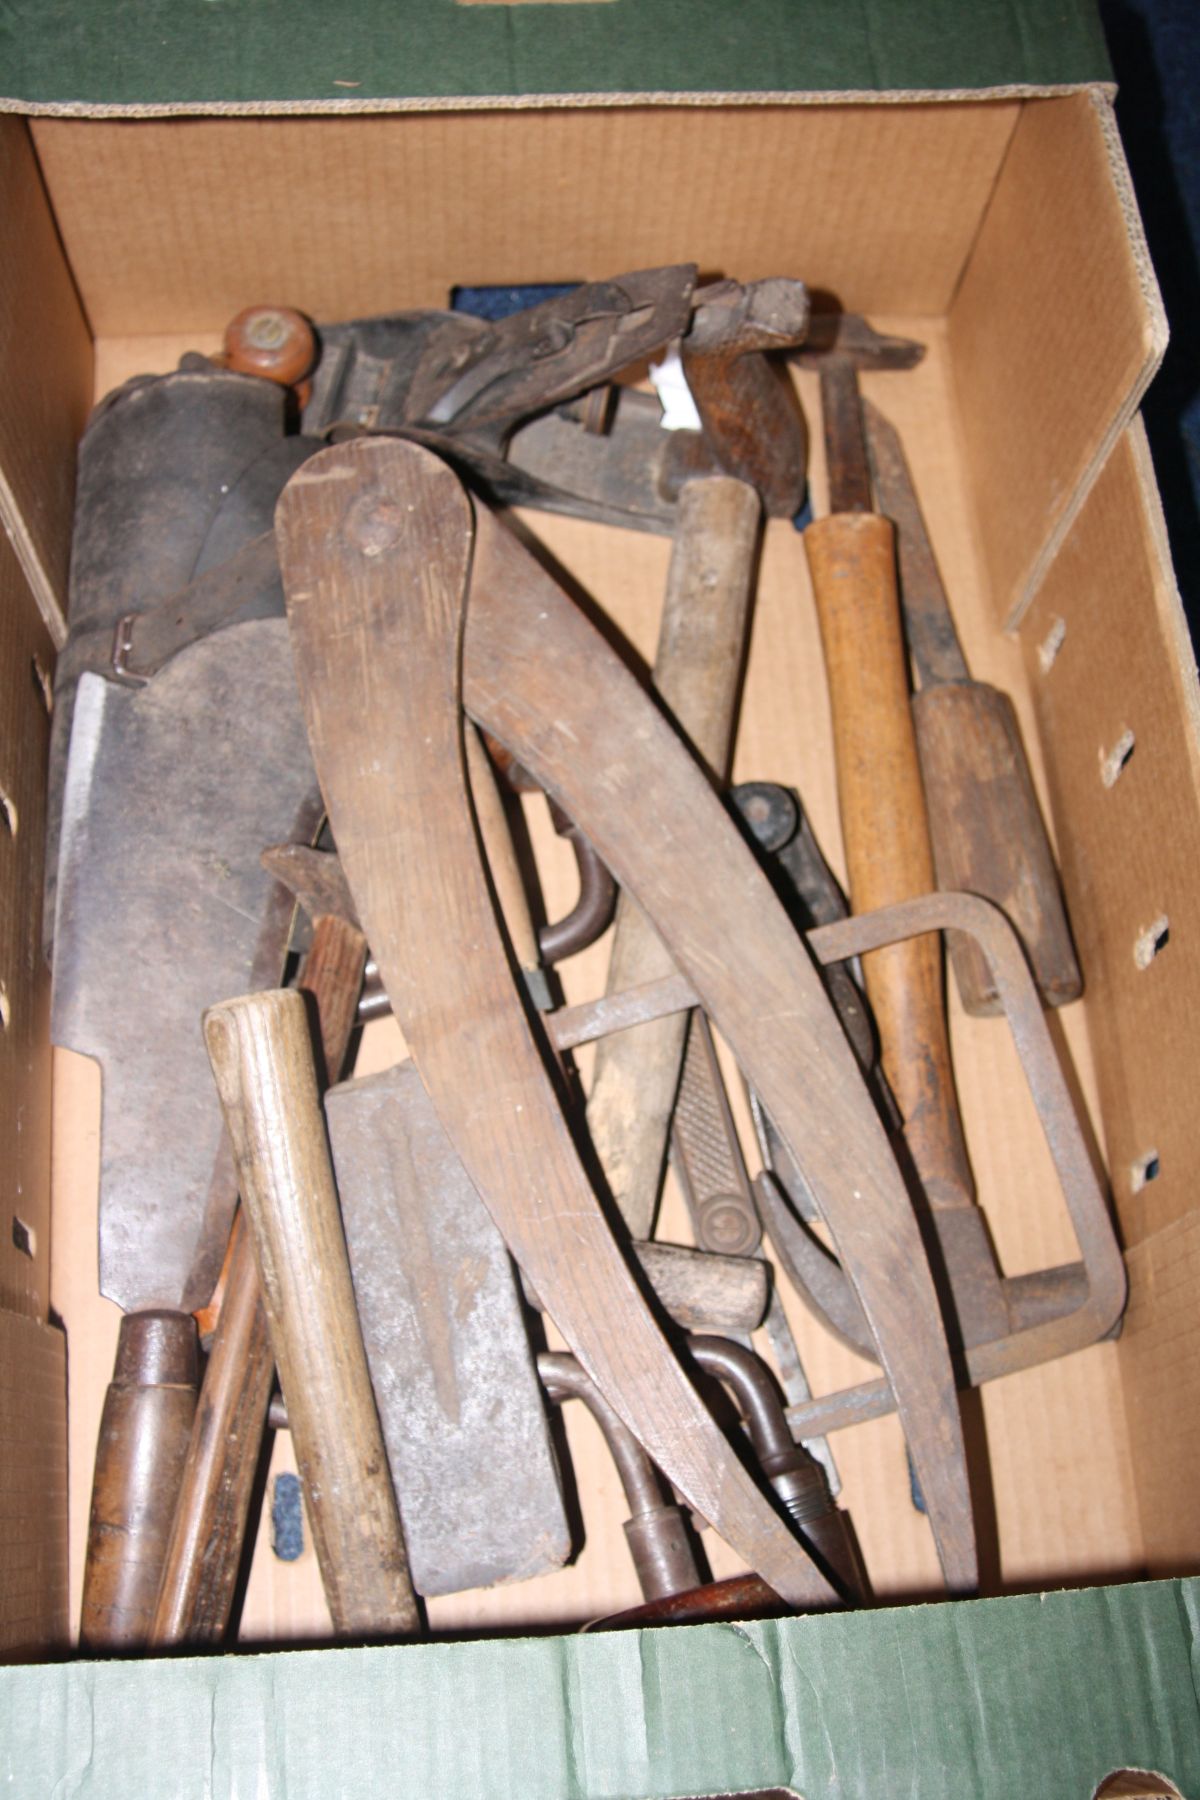 FIVE BOXES OF VARIOUS HAND TOOLS, to include planes, saws, hand sythes, files, chizels, hammers, - Image 8 of 14